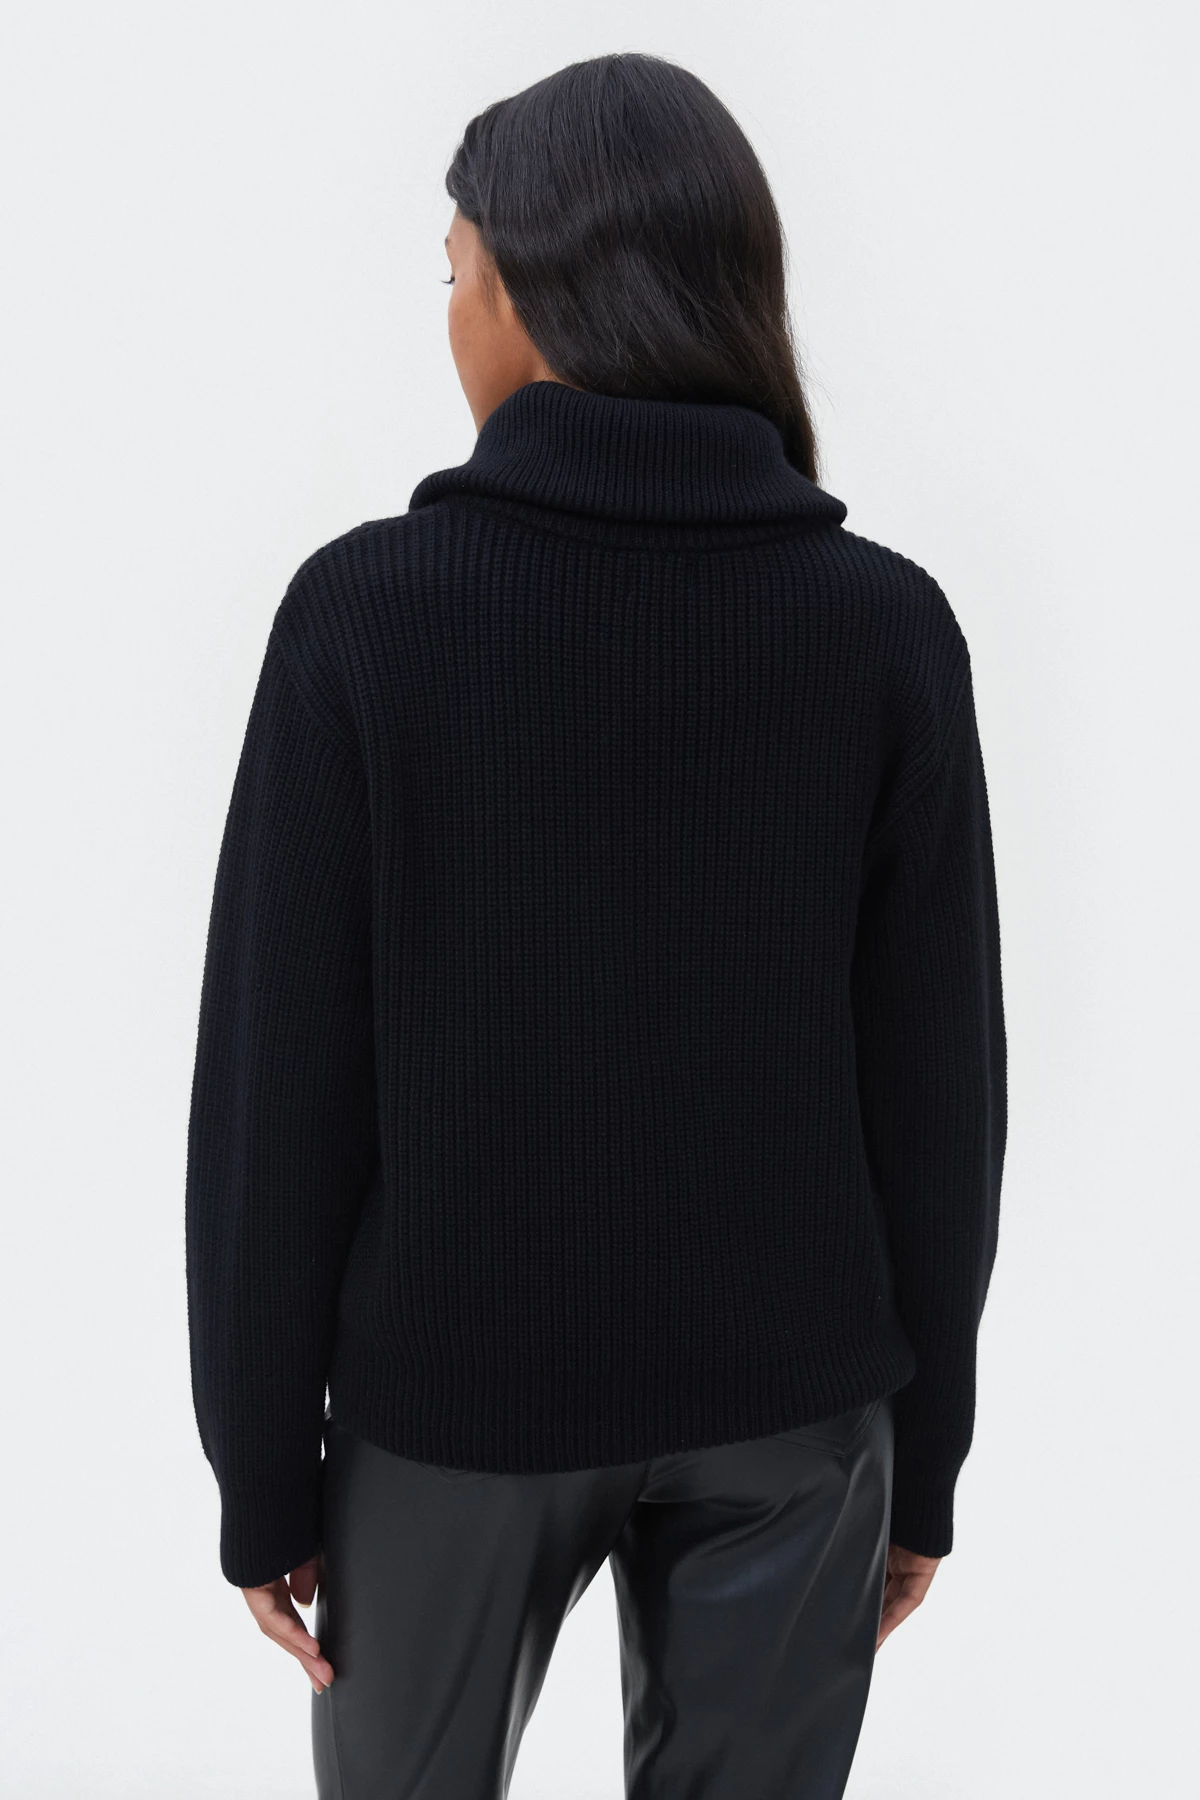 Knitted black sweater with wool, photo 5